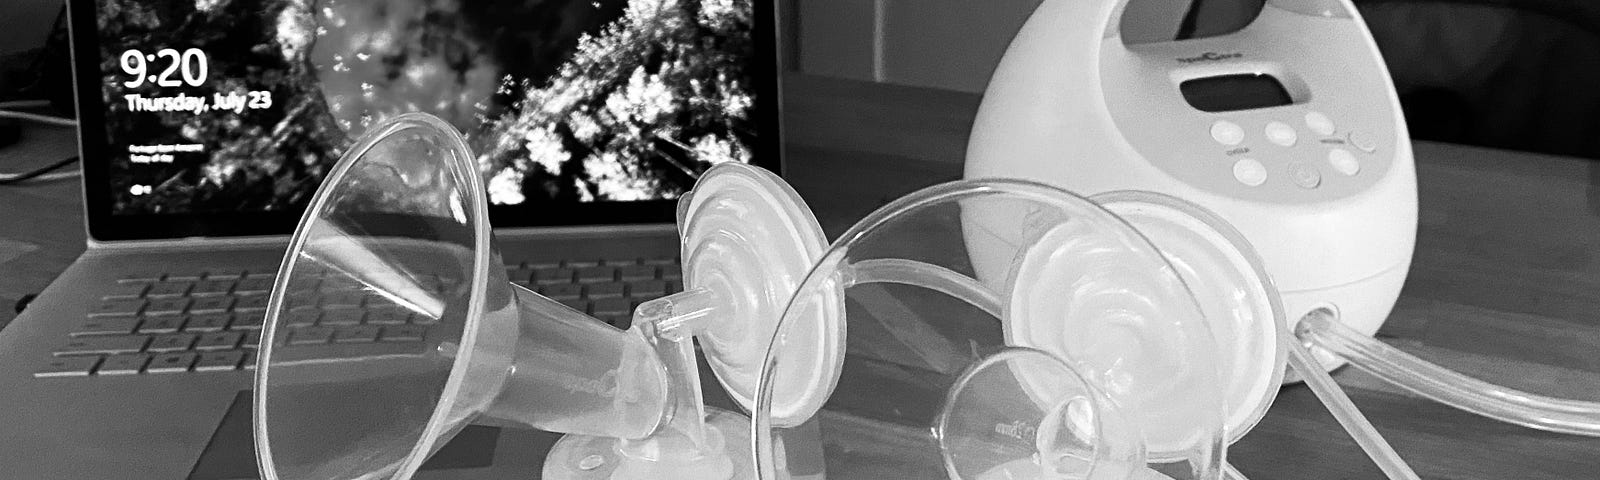 A breast pump machine sits on a desk in front of a laptop.